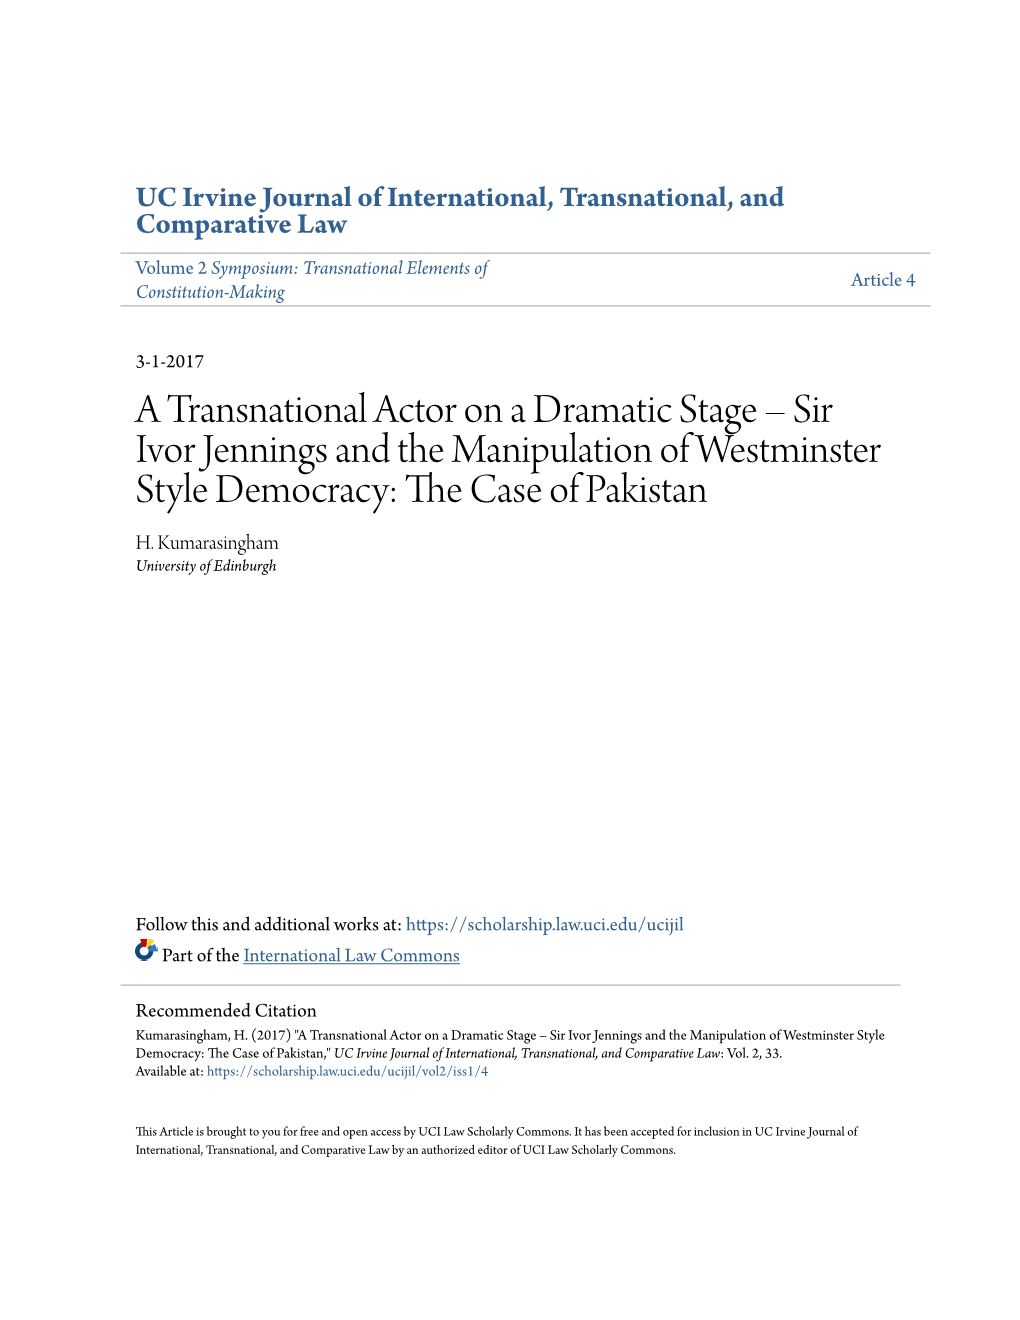 Sir Ivor Jennings and the Manipulation of Westminster Style Democracy: the Ac Se of Pakistan H